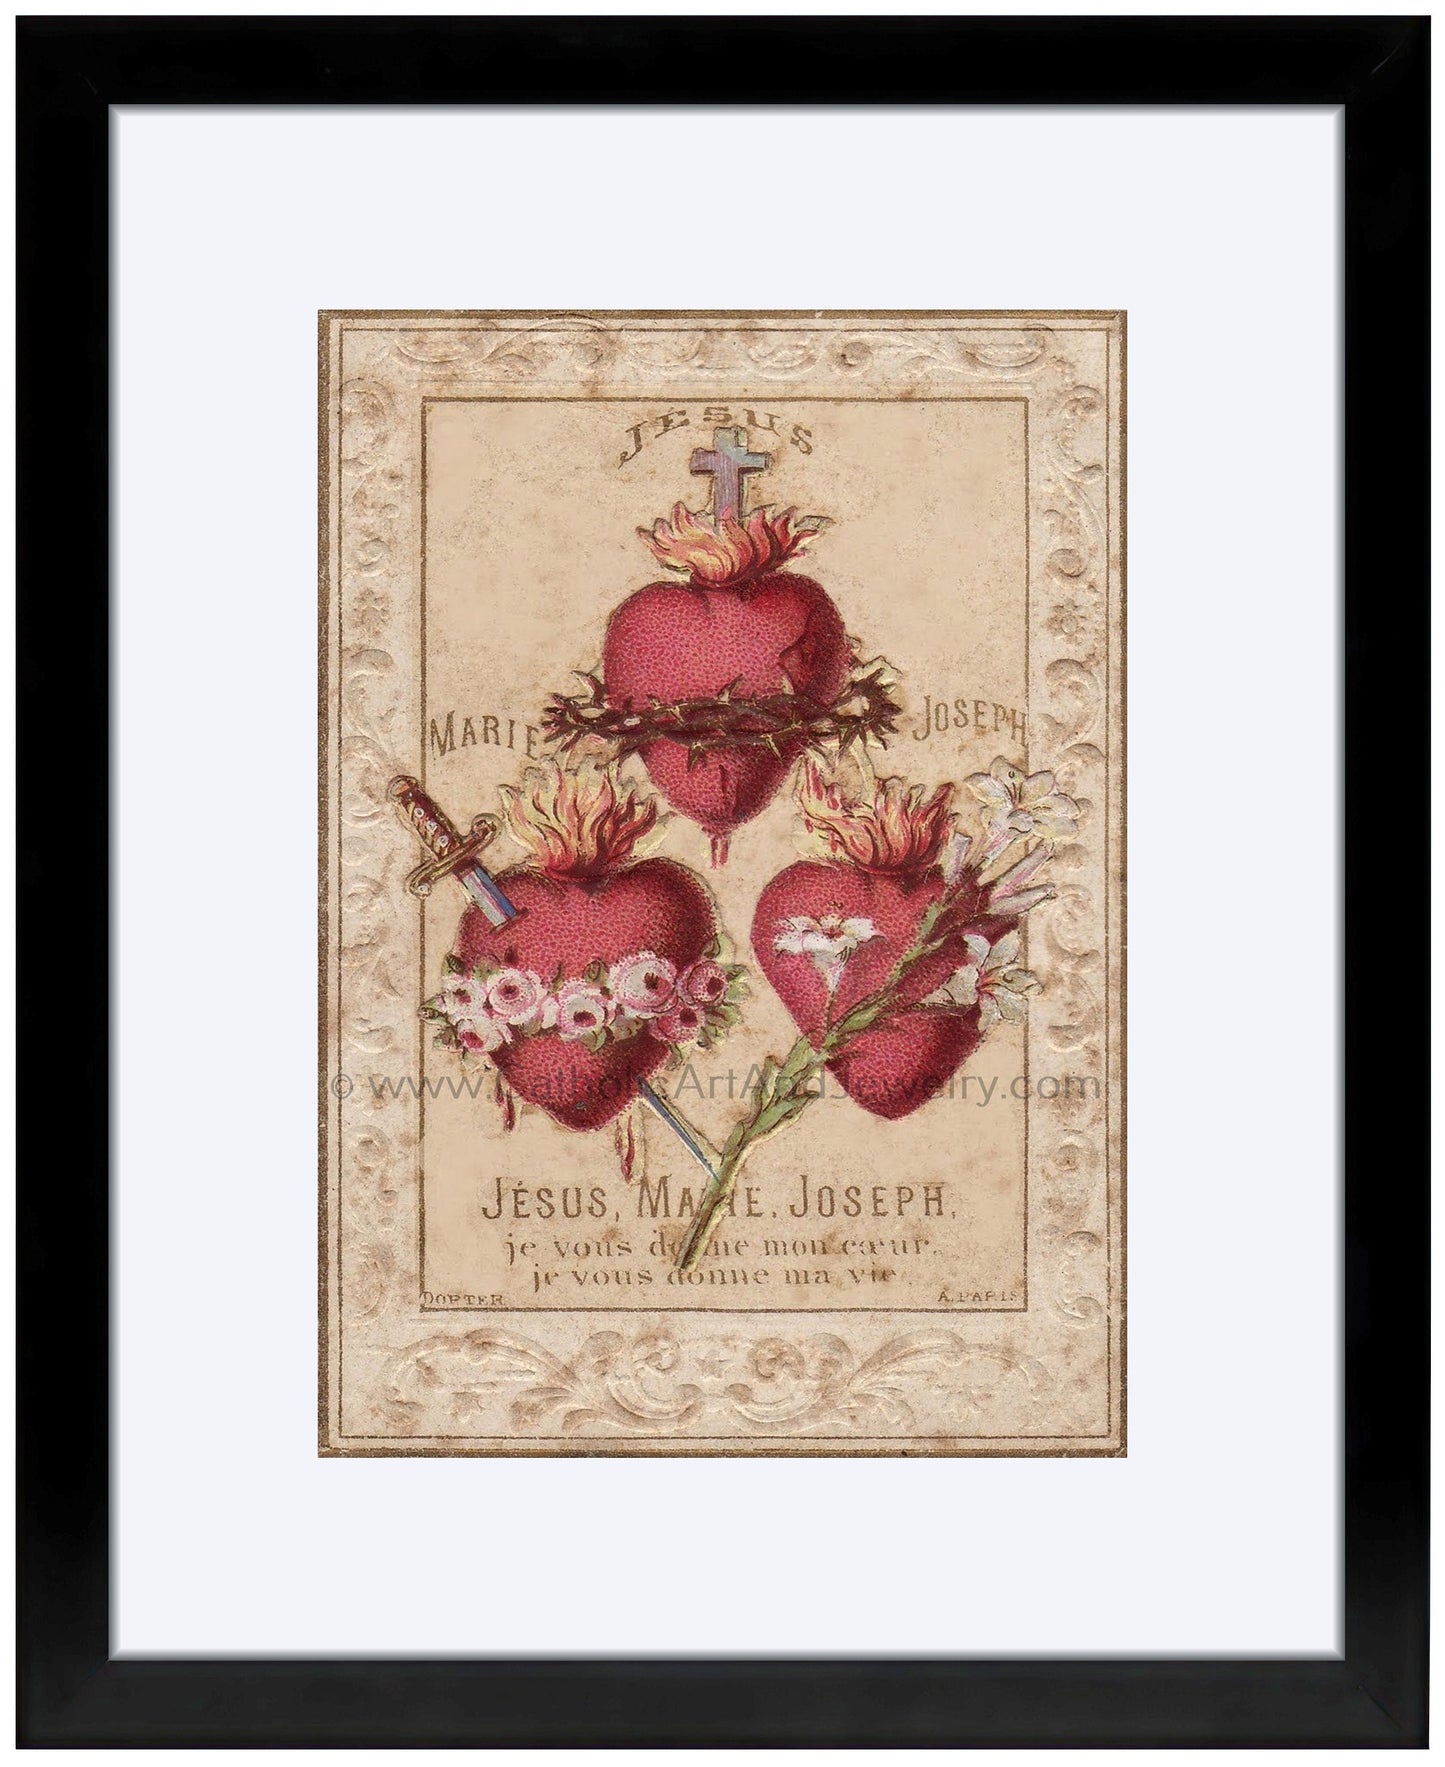 Hearts of the Holy Family – Including the Chaste Heart of St. Joseph – based on a Vintage French Holy Card – Catholic Art Print